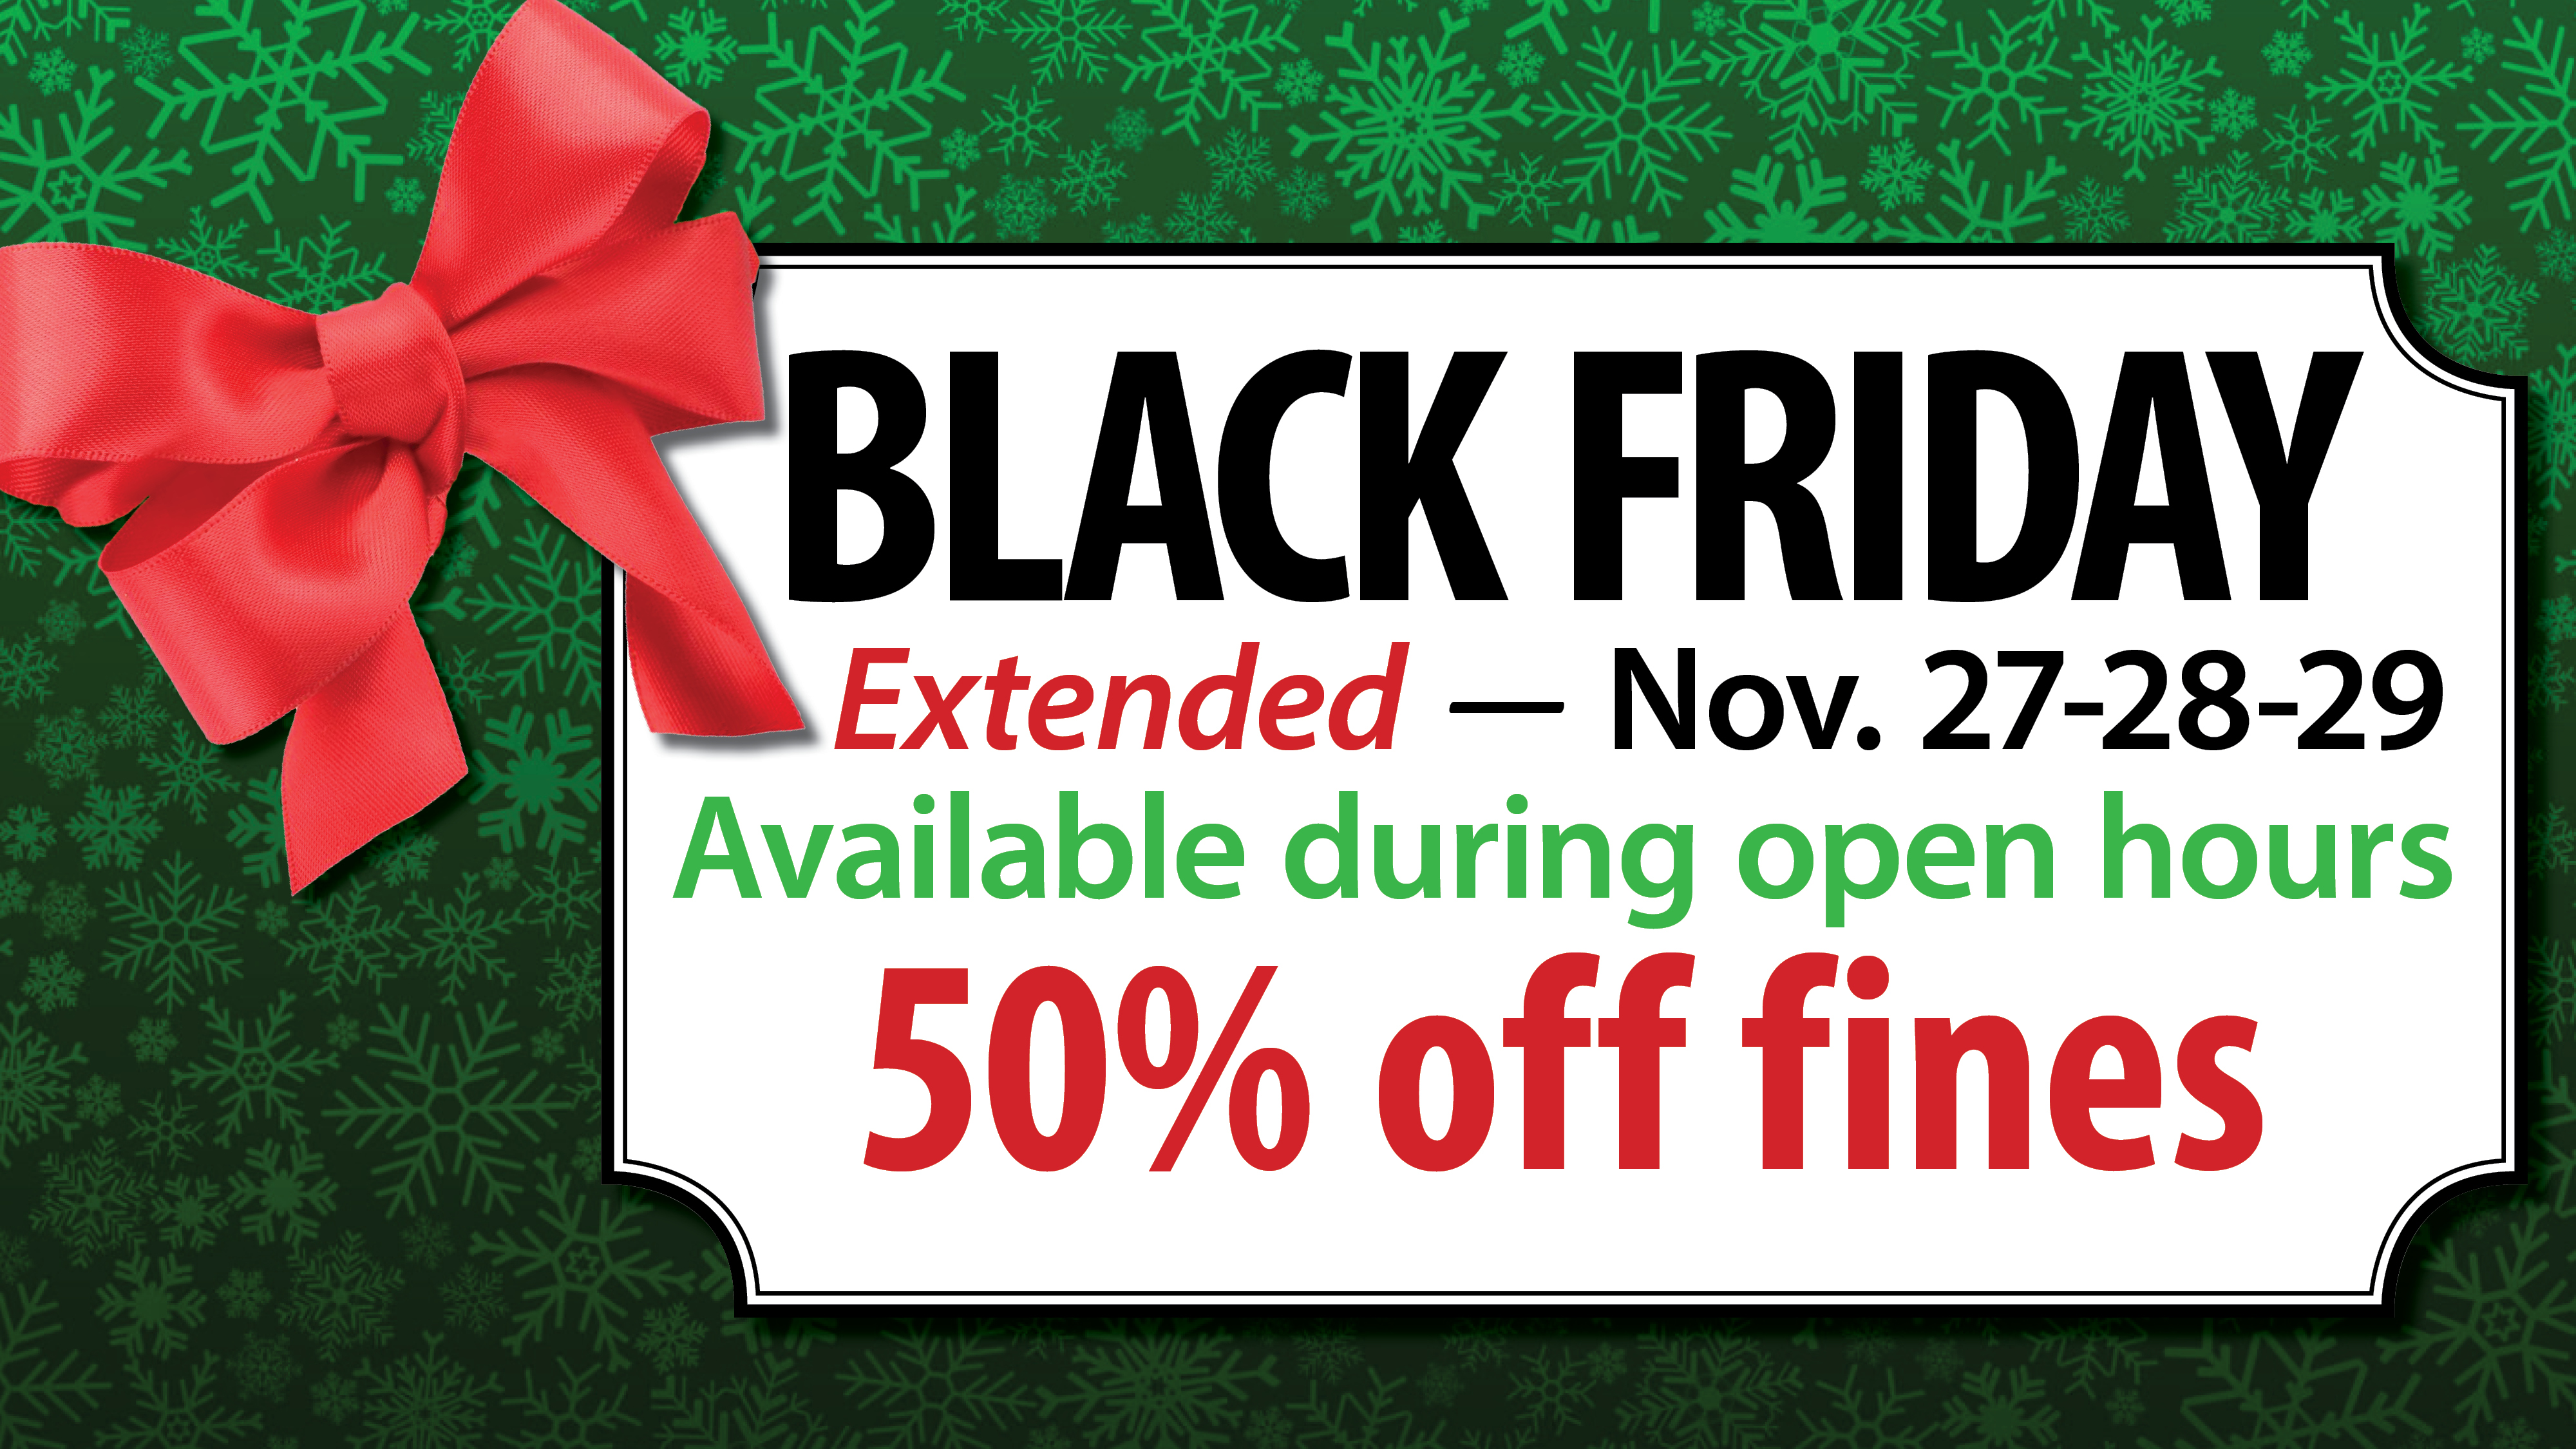 Black Friday sale extended all weekend